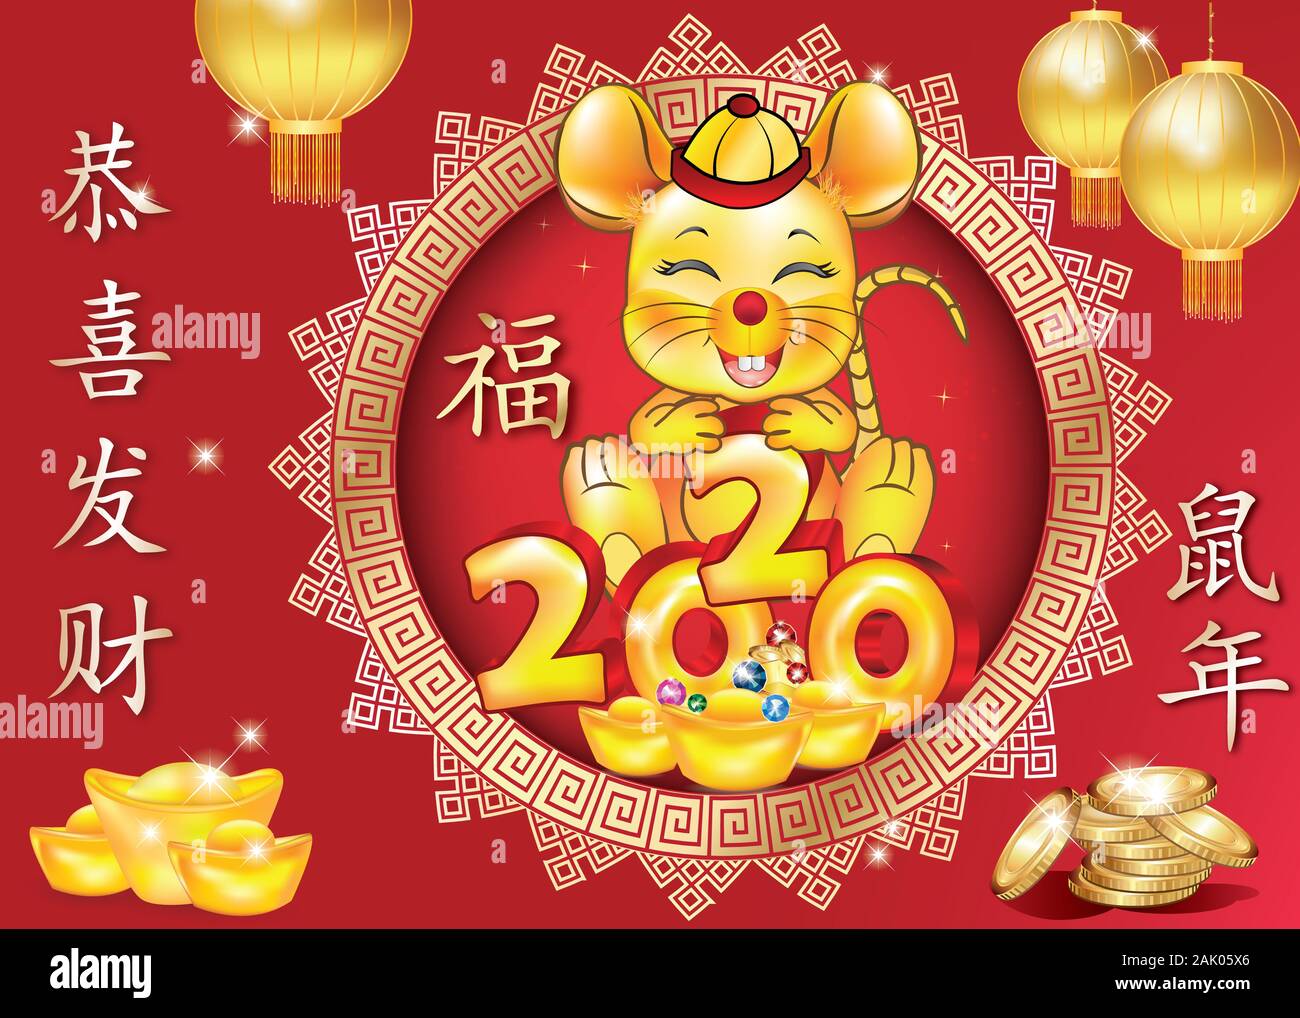 Red greeting card - Happy Chinese New Year of the Rat 2020! Ideograms translation: Gong Xi Fa Cai (Congratulations and make fortune). Year of the Rat. Stock Photo